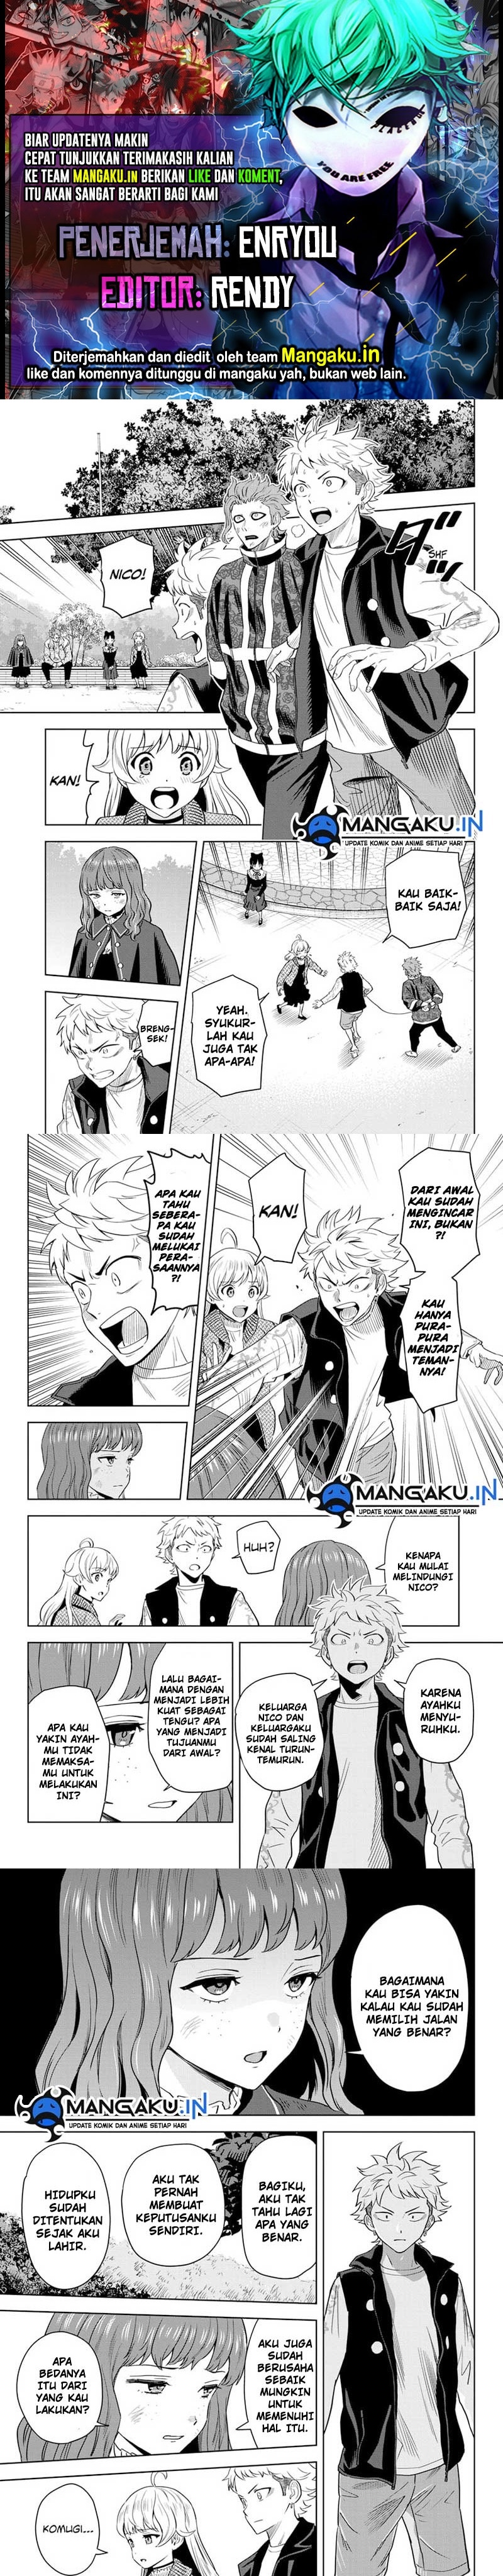 Witch Watch Chapter 126 Bahasa Indonesia